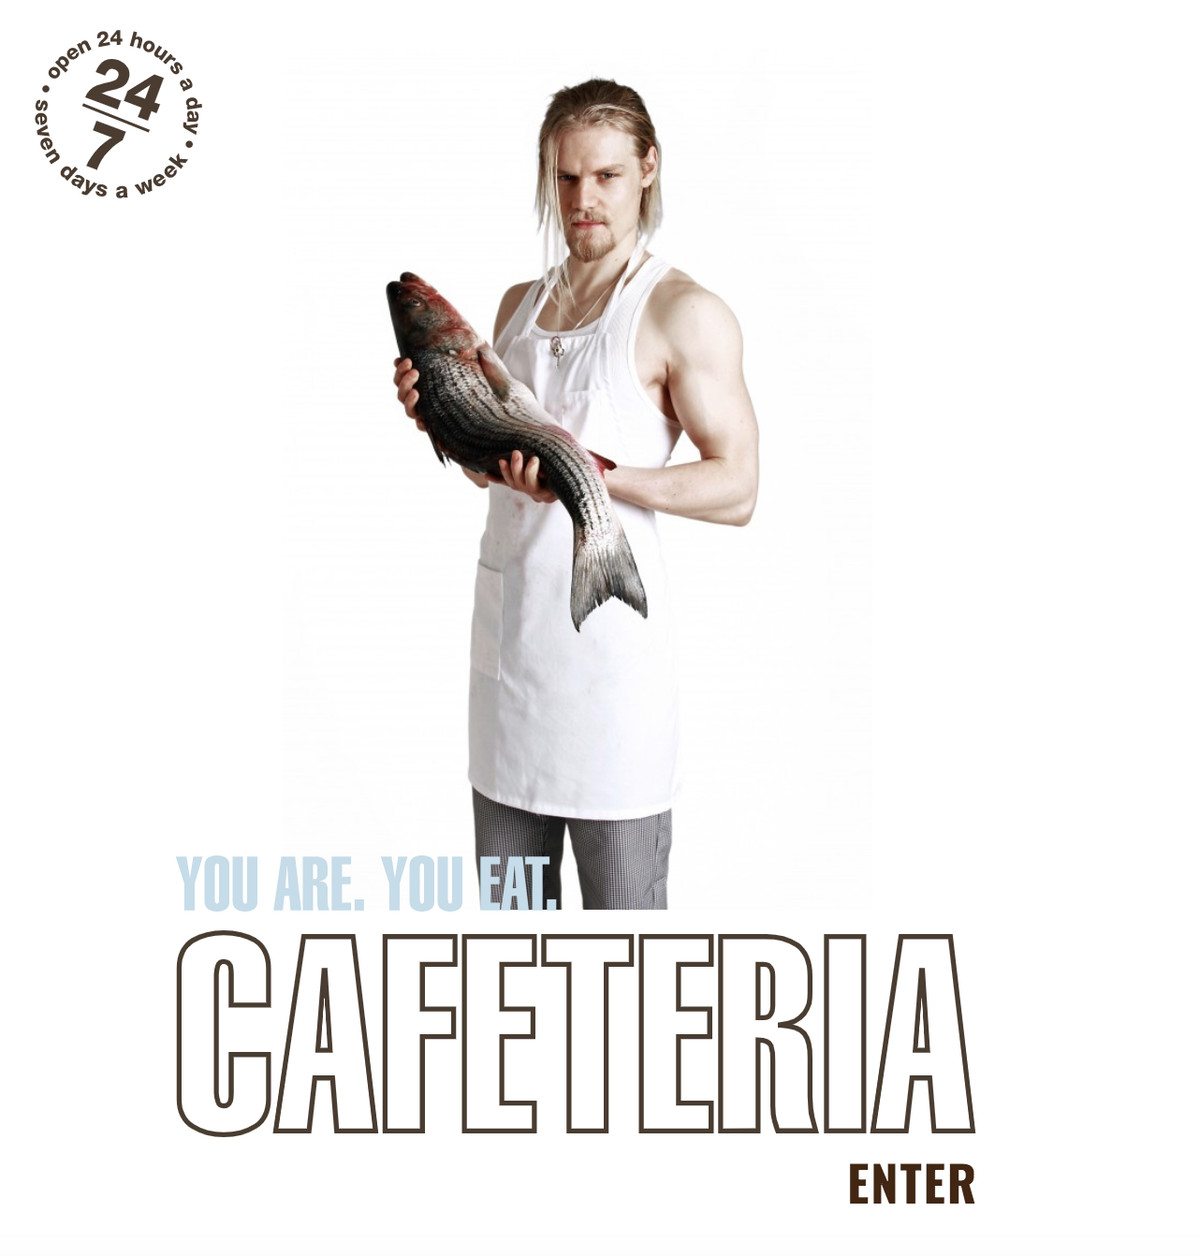 Cafeteria’s website, for some reason